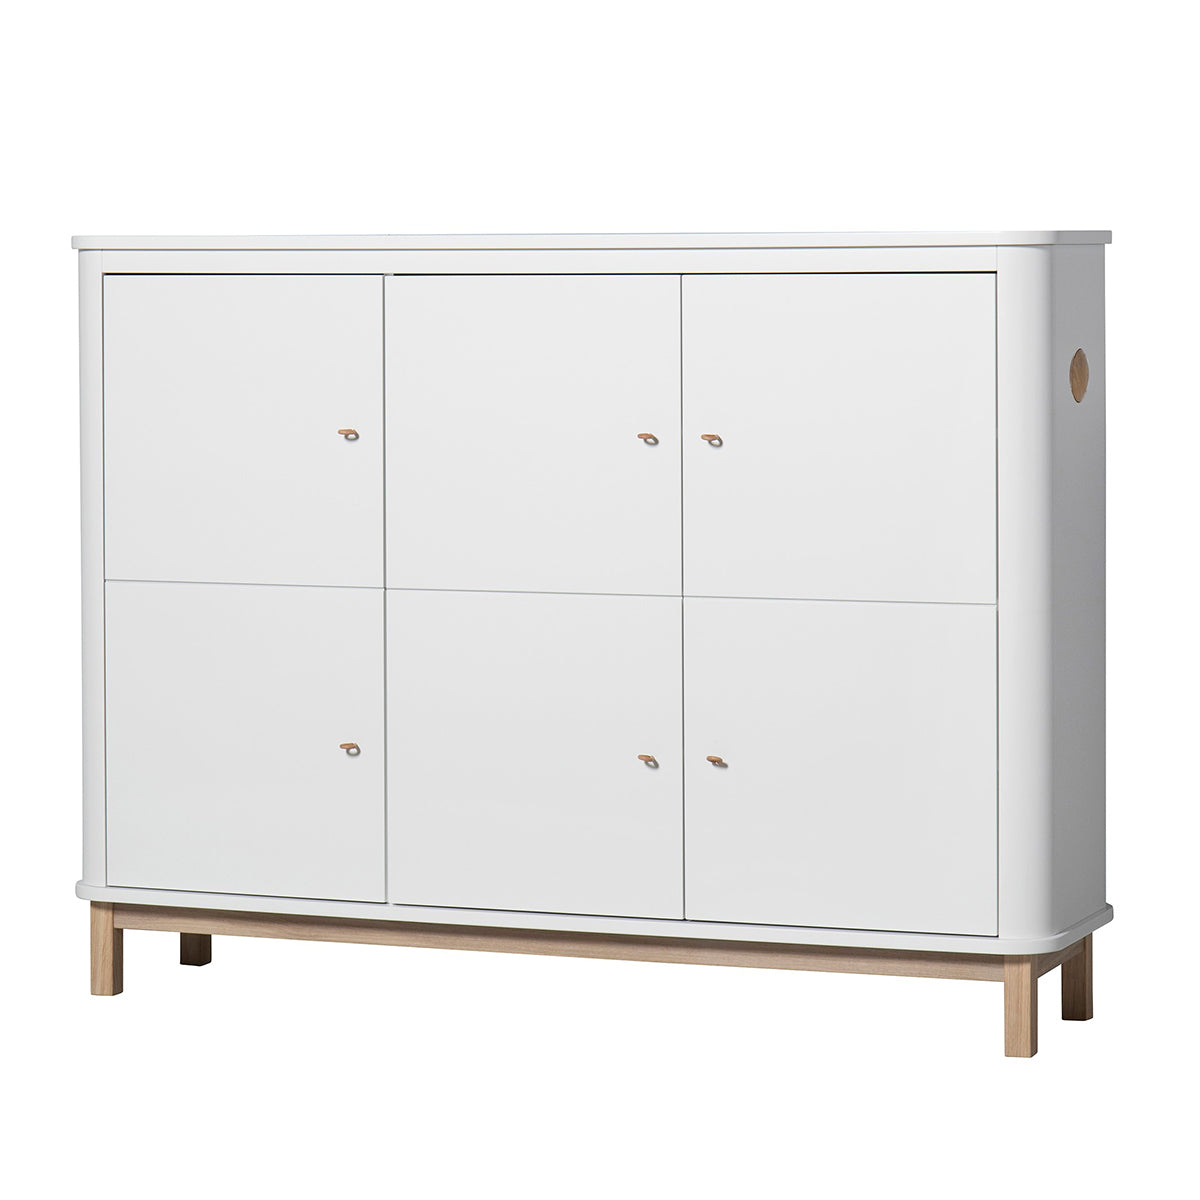 Oliver Furniture Wood Collection multi-cupboard, 3 doors, white/oak